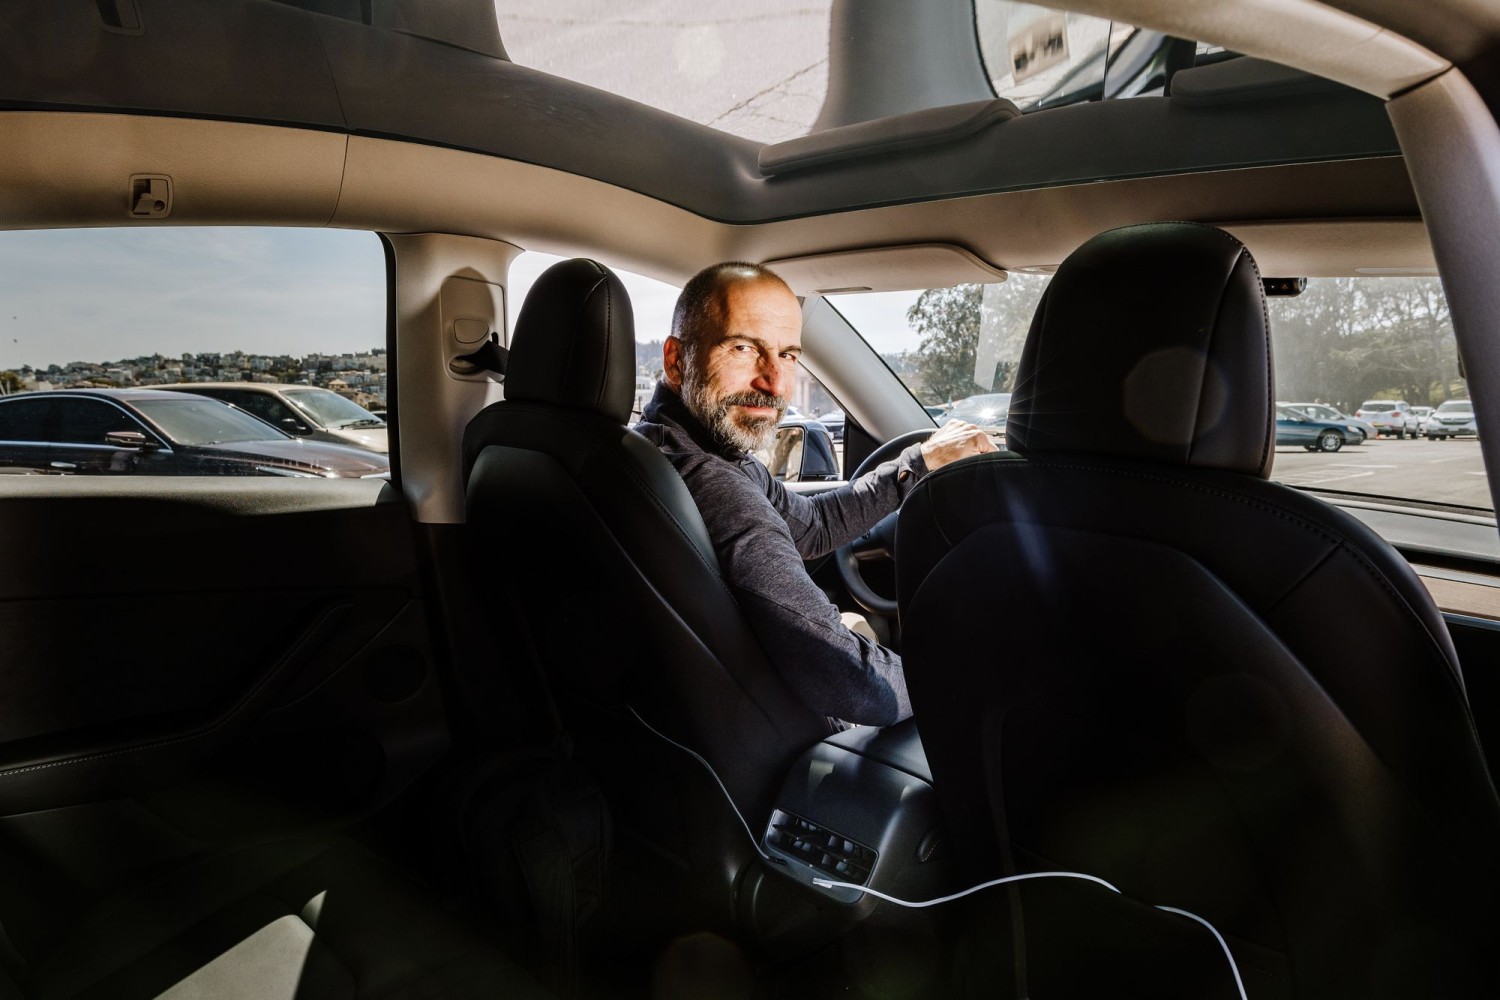 CEO Dara Khosrowshahi in the gray Tesla he uses to drive passengers, in San Francisco on Wednesday.